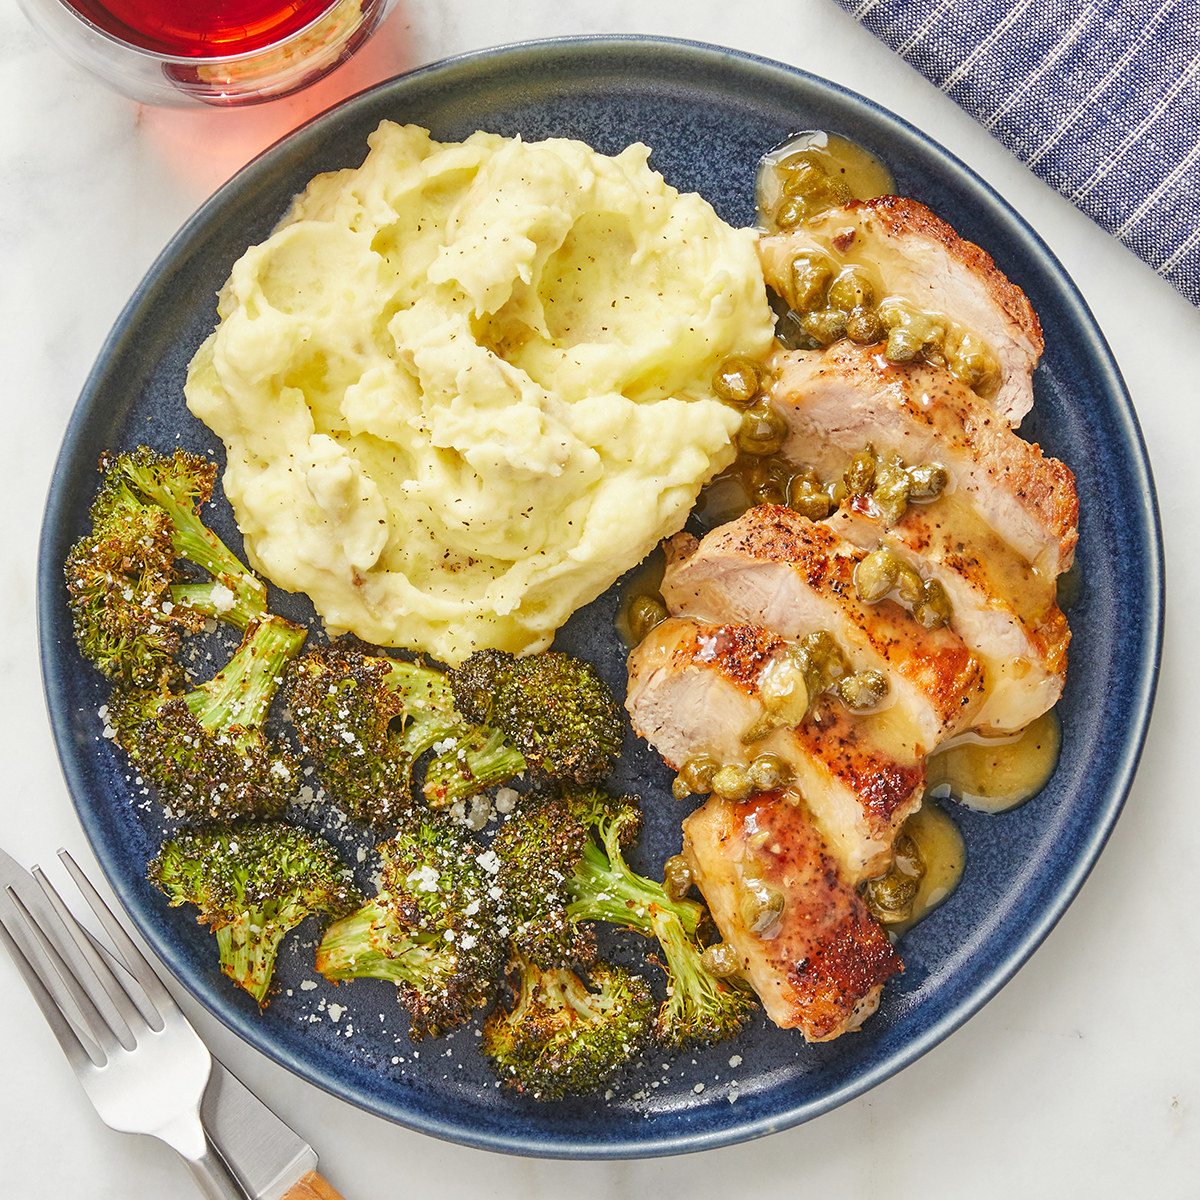 plate of garlic mashed potatoes and broccoli and pork chops with lemon caper sauce